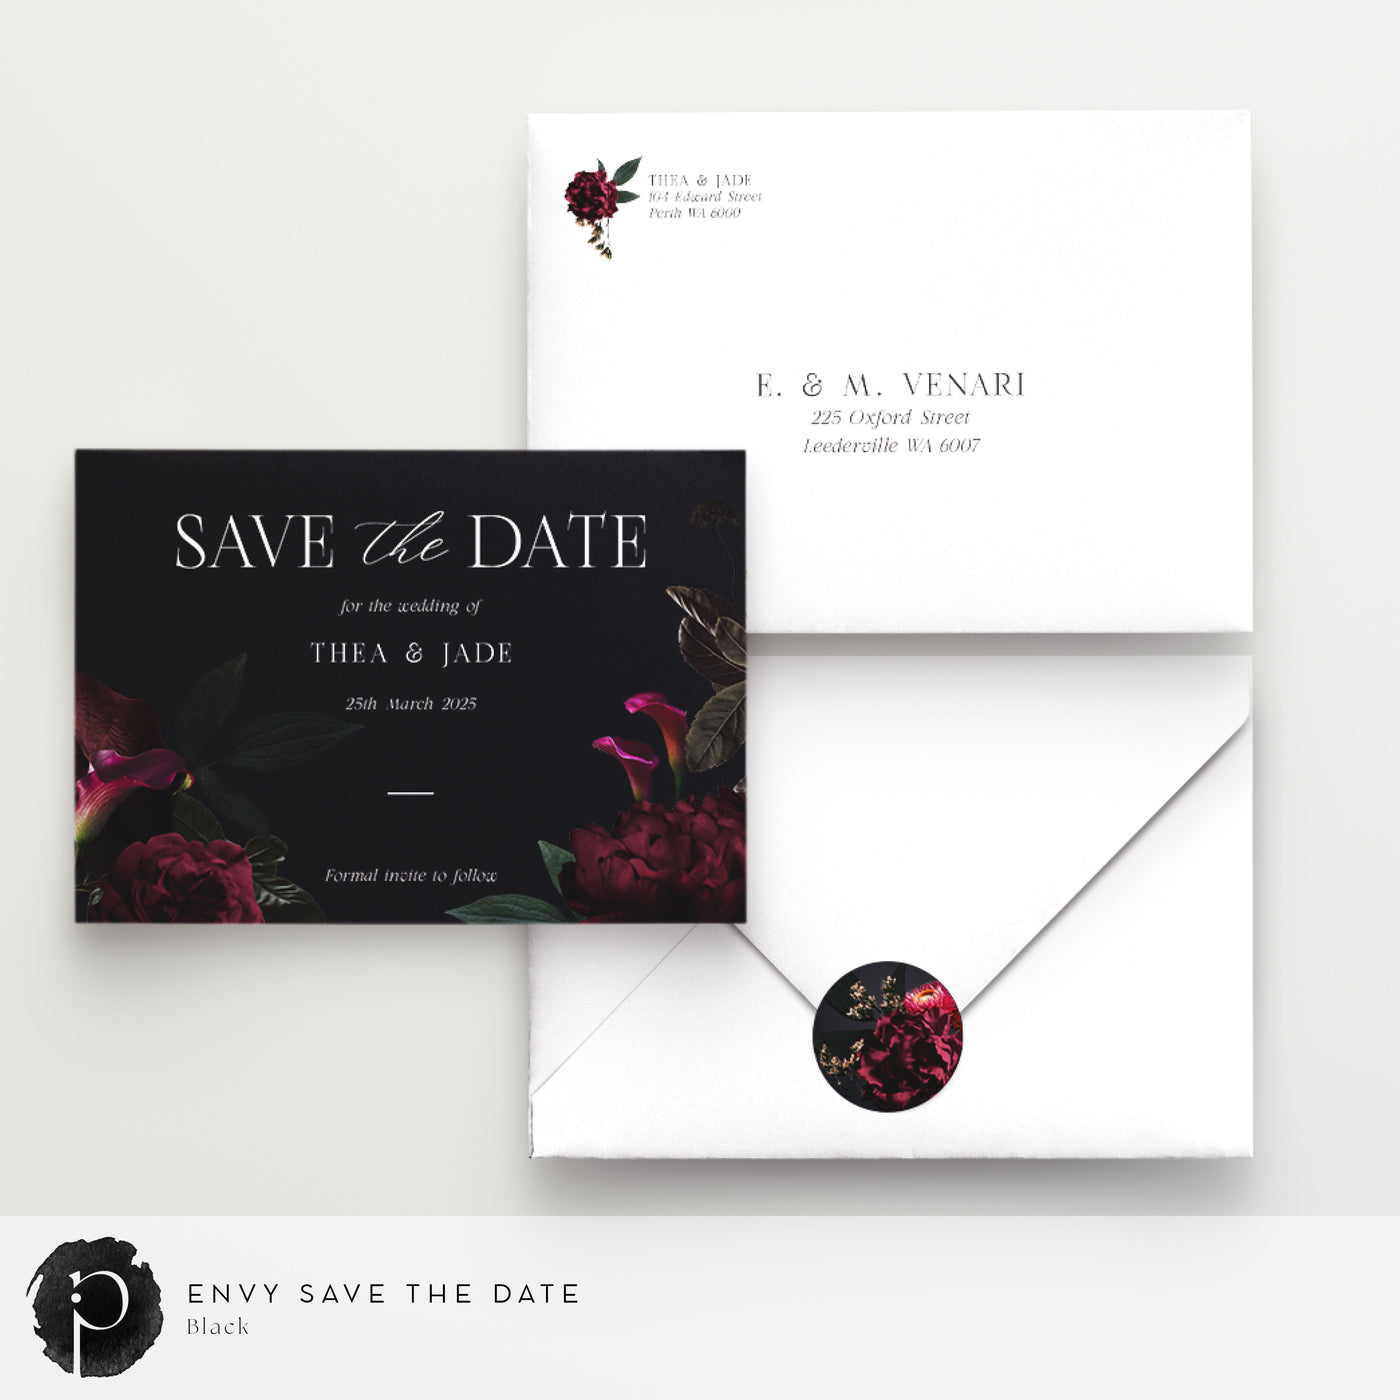 Envy - Save The Date Cards